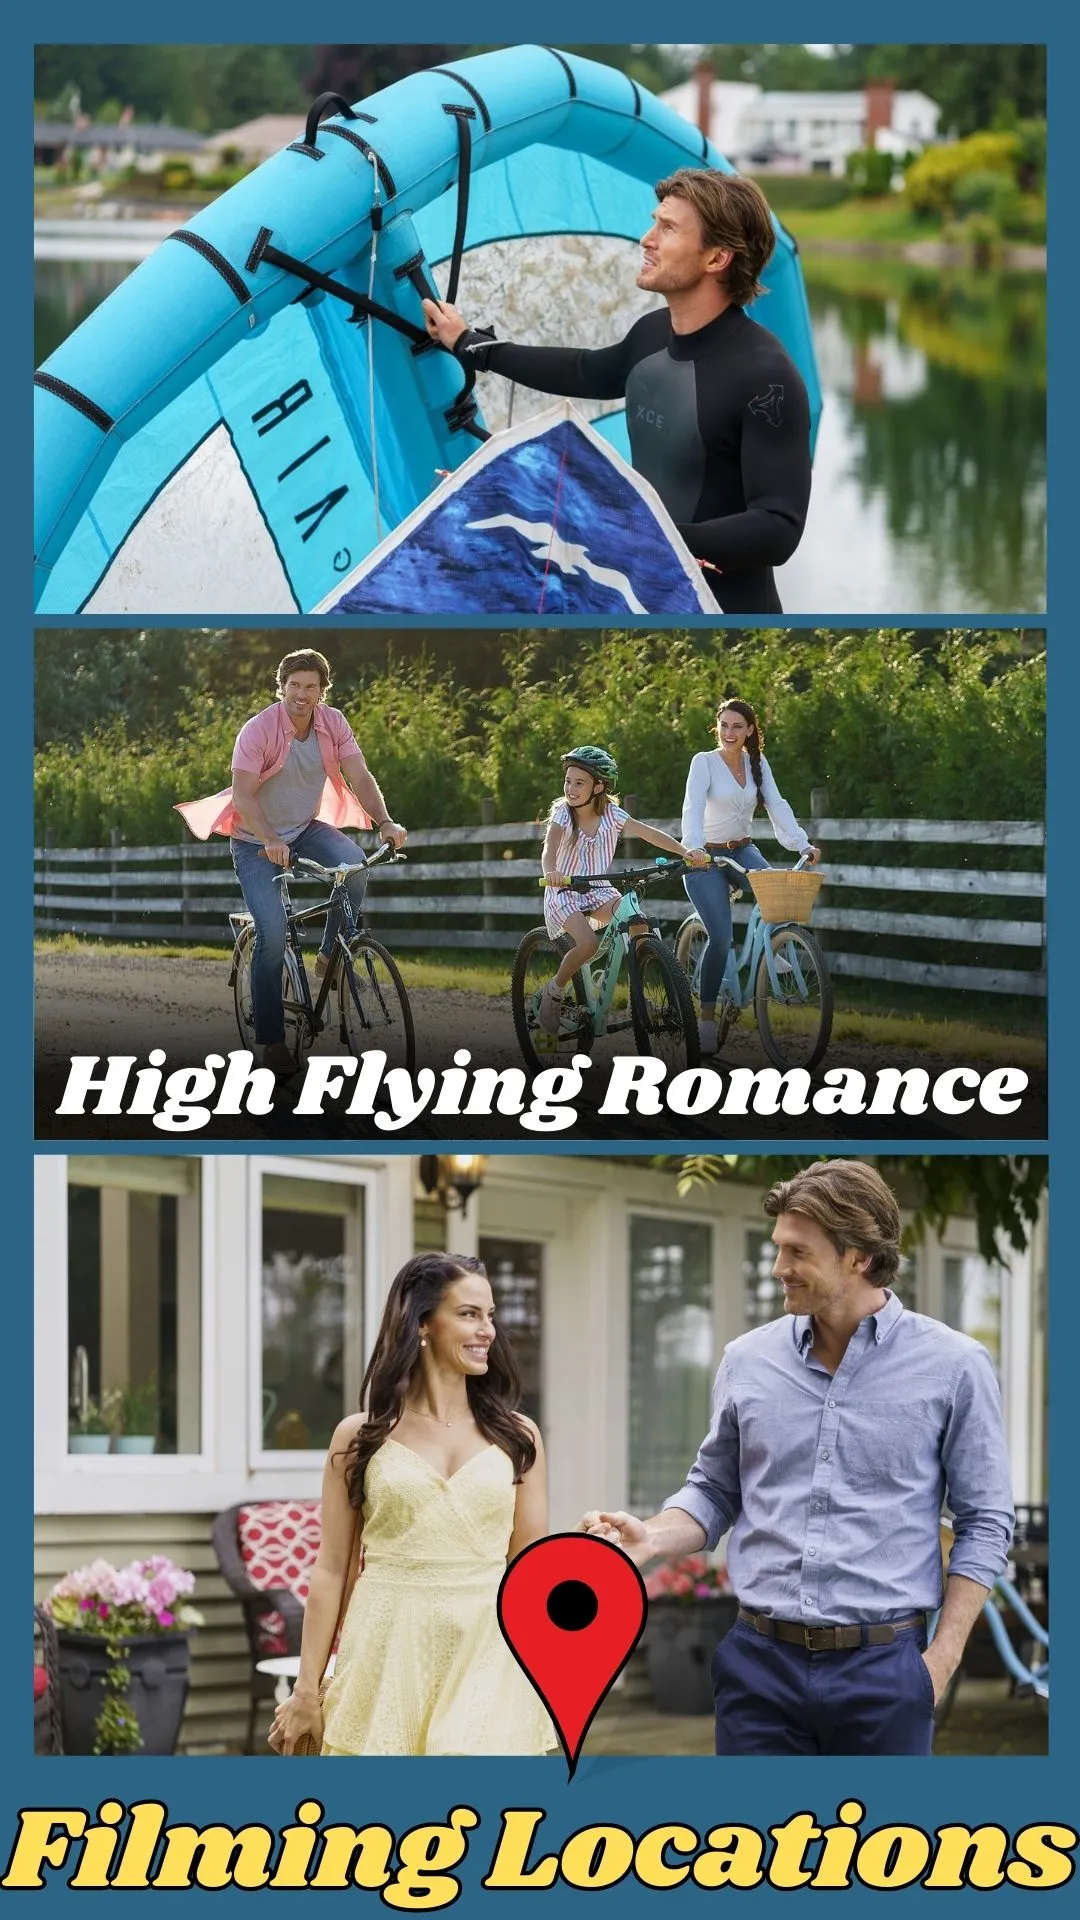 High Flying Romance Filming Locations